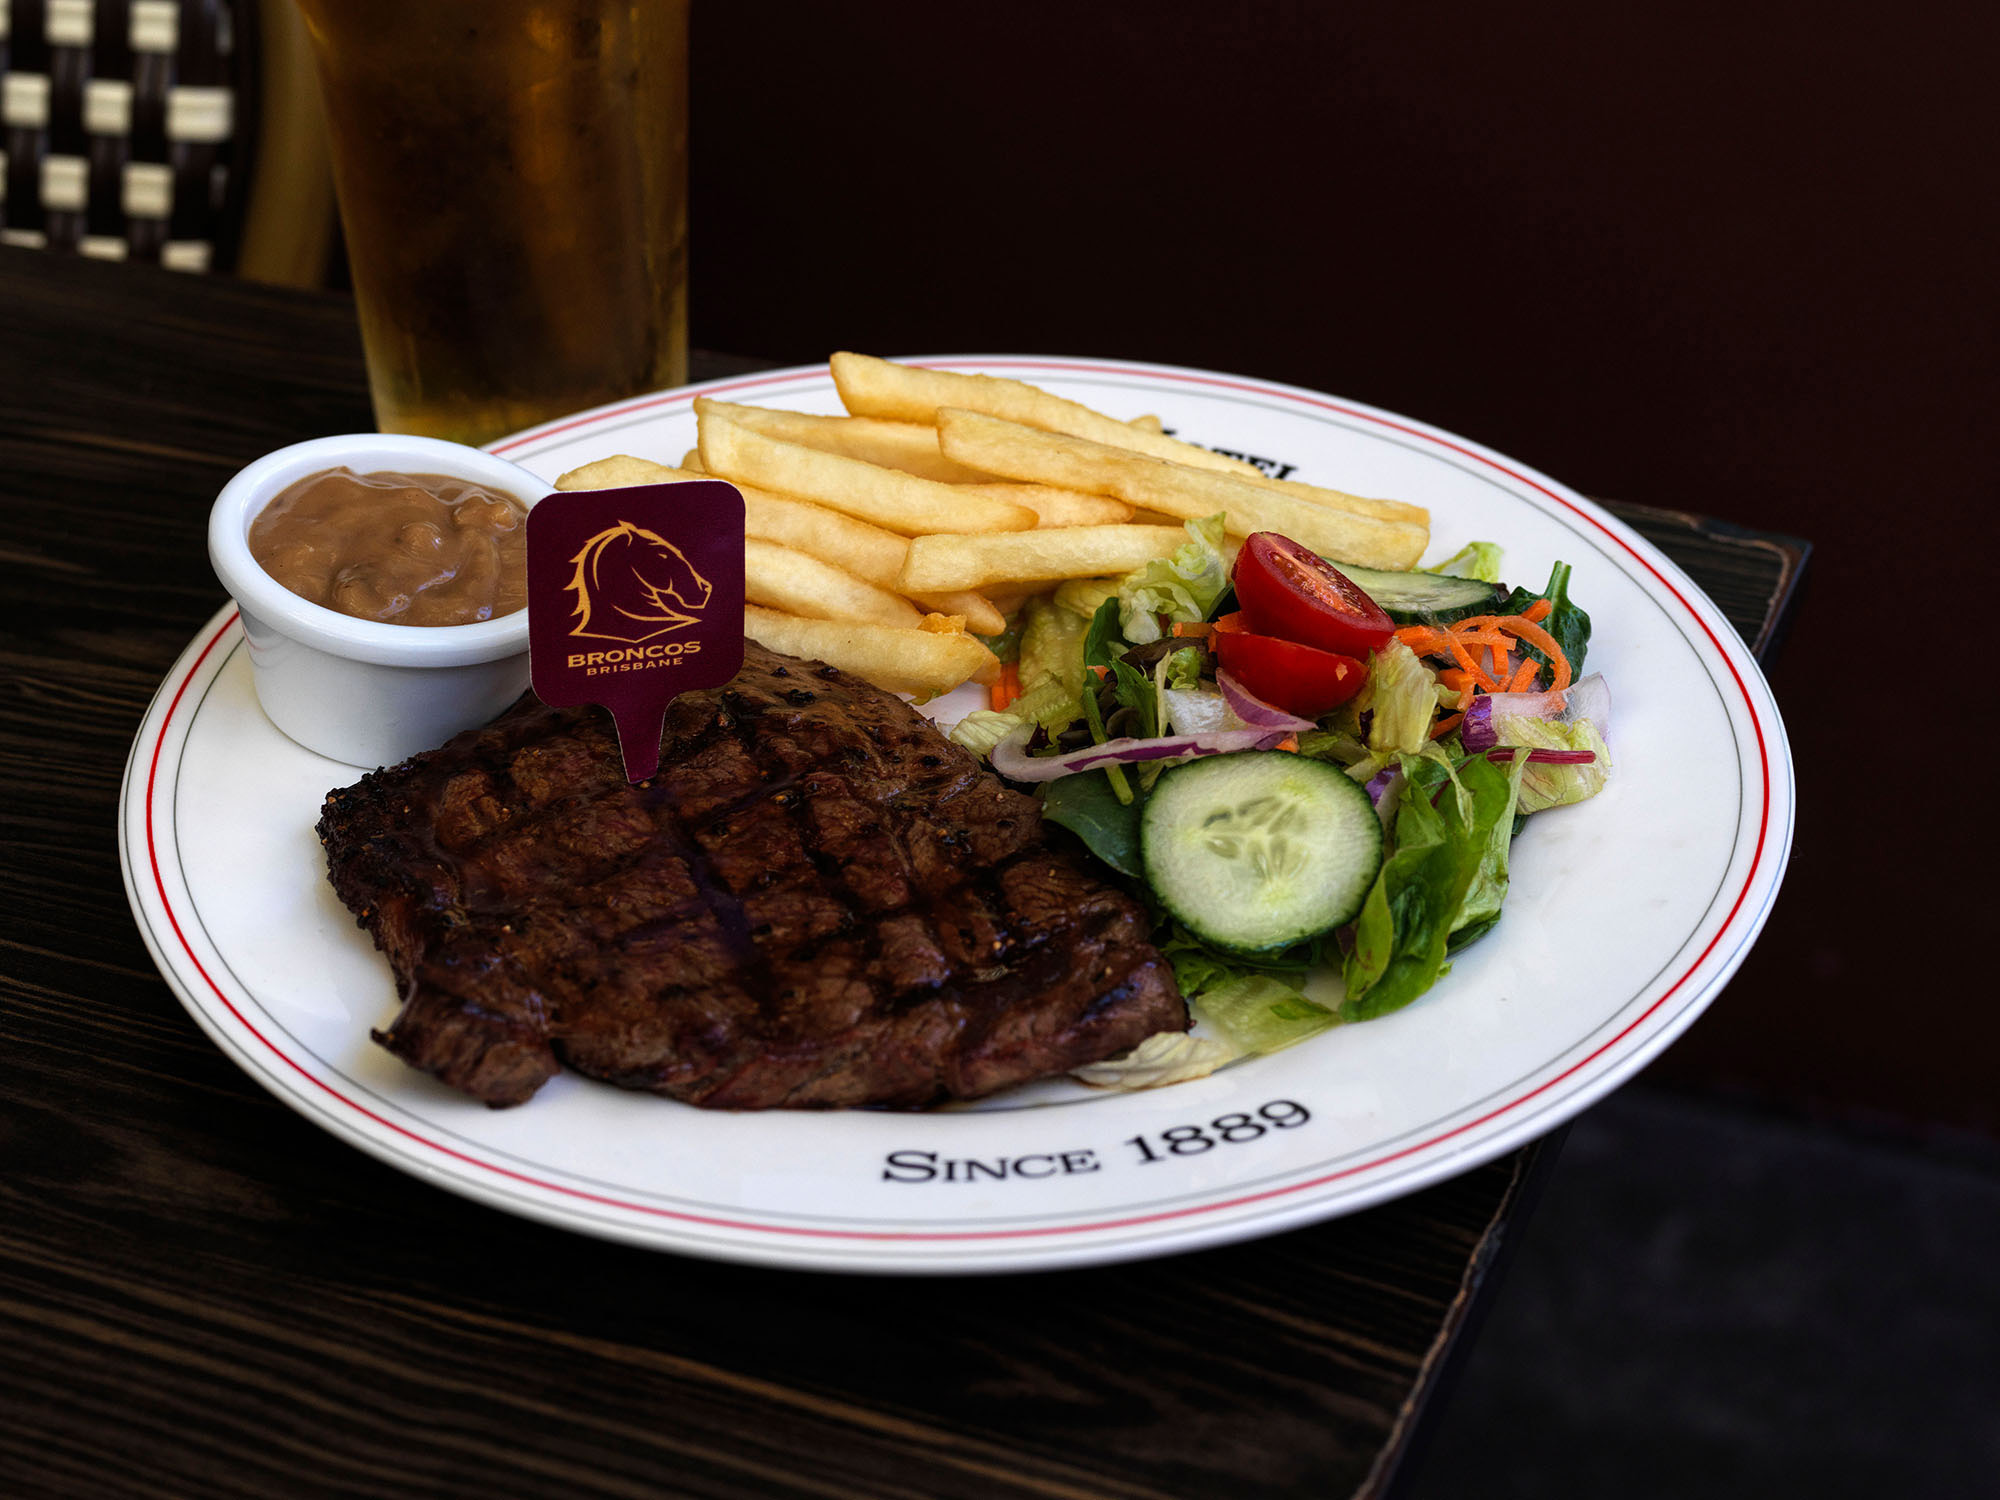 The Broncos Rump glazed with a XXXX BBQ sauce - a footy season special at participating QLD venues